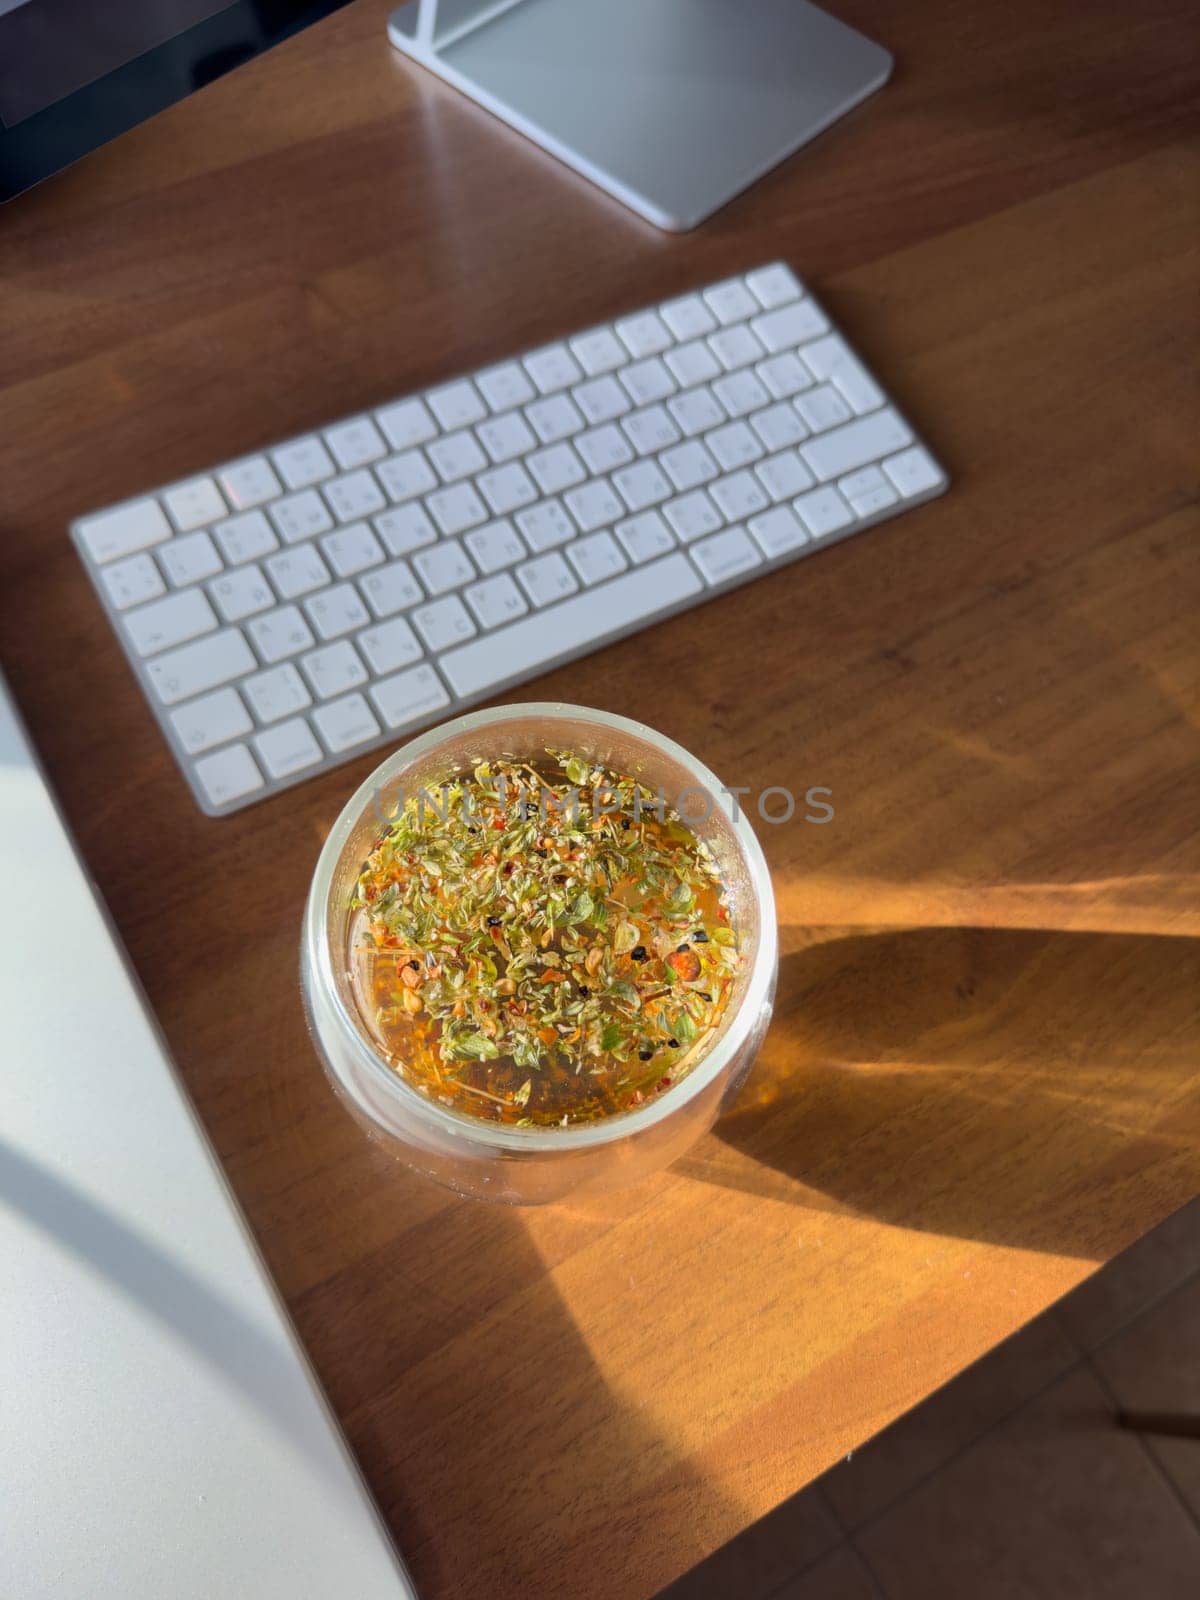 herbal tea with fruits is brewed in a transparent glass cup on the table, sunlight through the window beautifully illuminates the tea, a desktop with a laptop, monitor, wireless keyboard by vladimirdrozdin